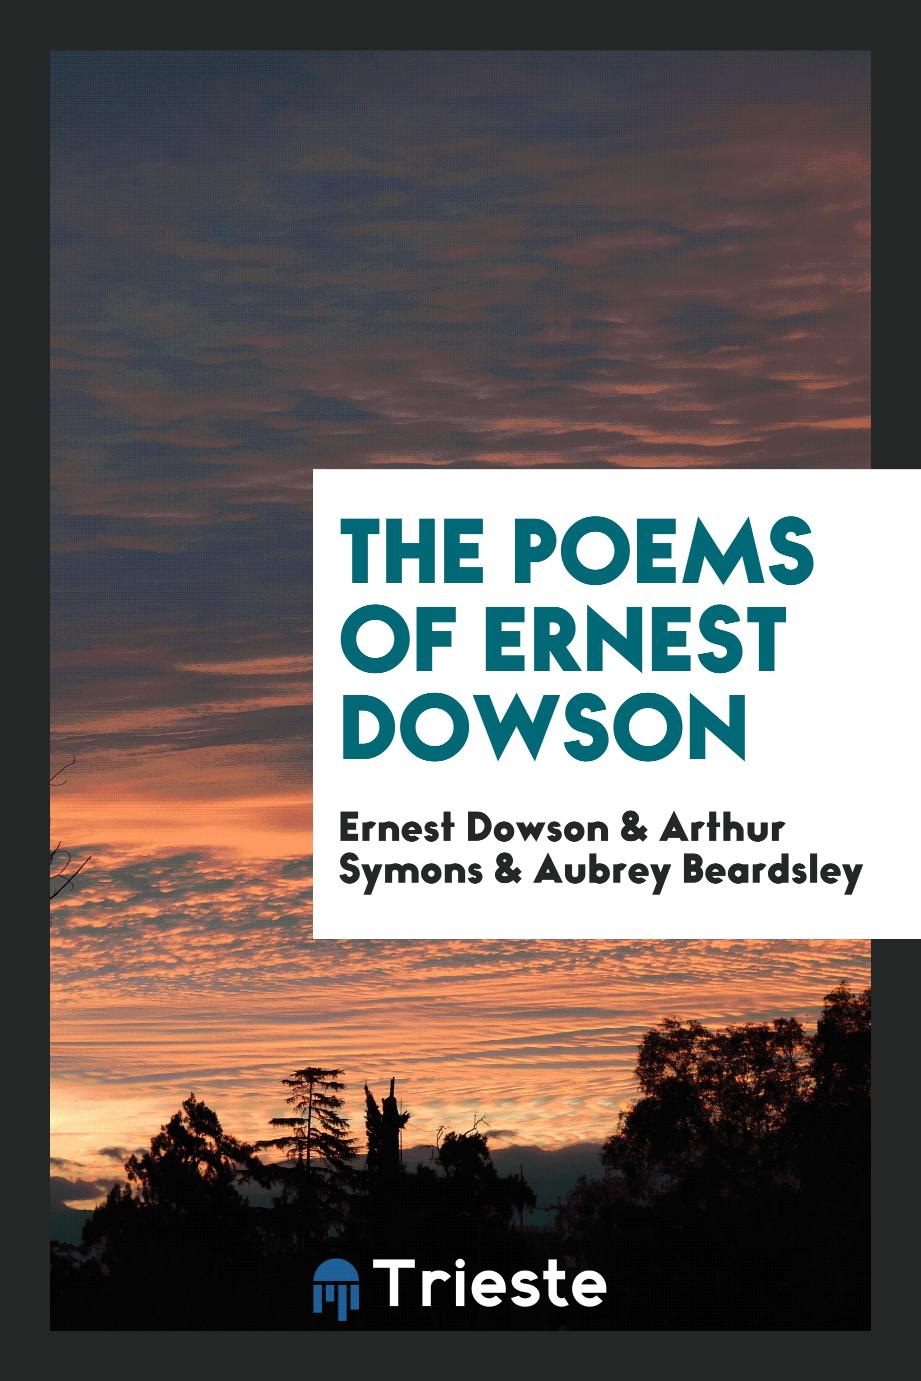 The poems of Ernest Dowson